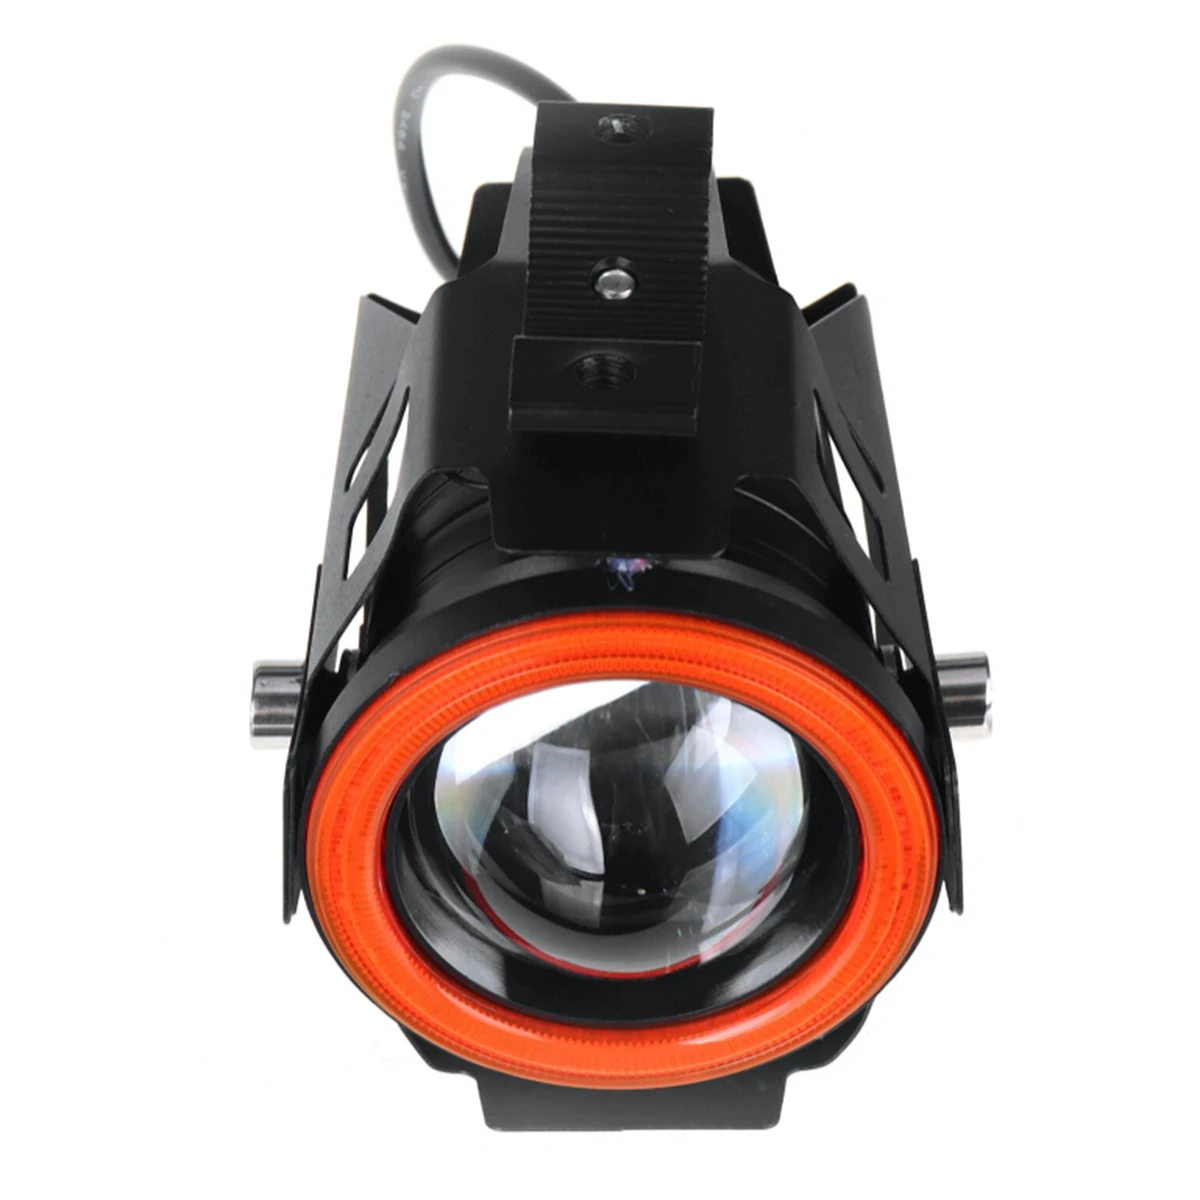 LAOTIE U7 Front Light Scooter Light Headlamp Night Riding Suitable For  12-70V Electric Scooter For Laotie Scooter